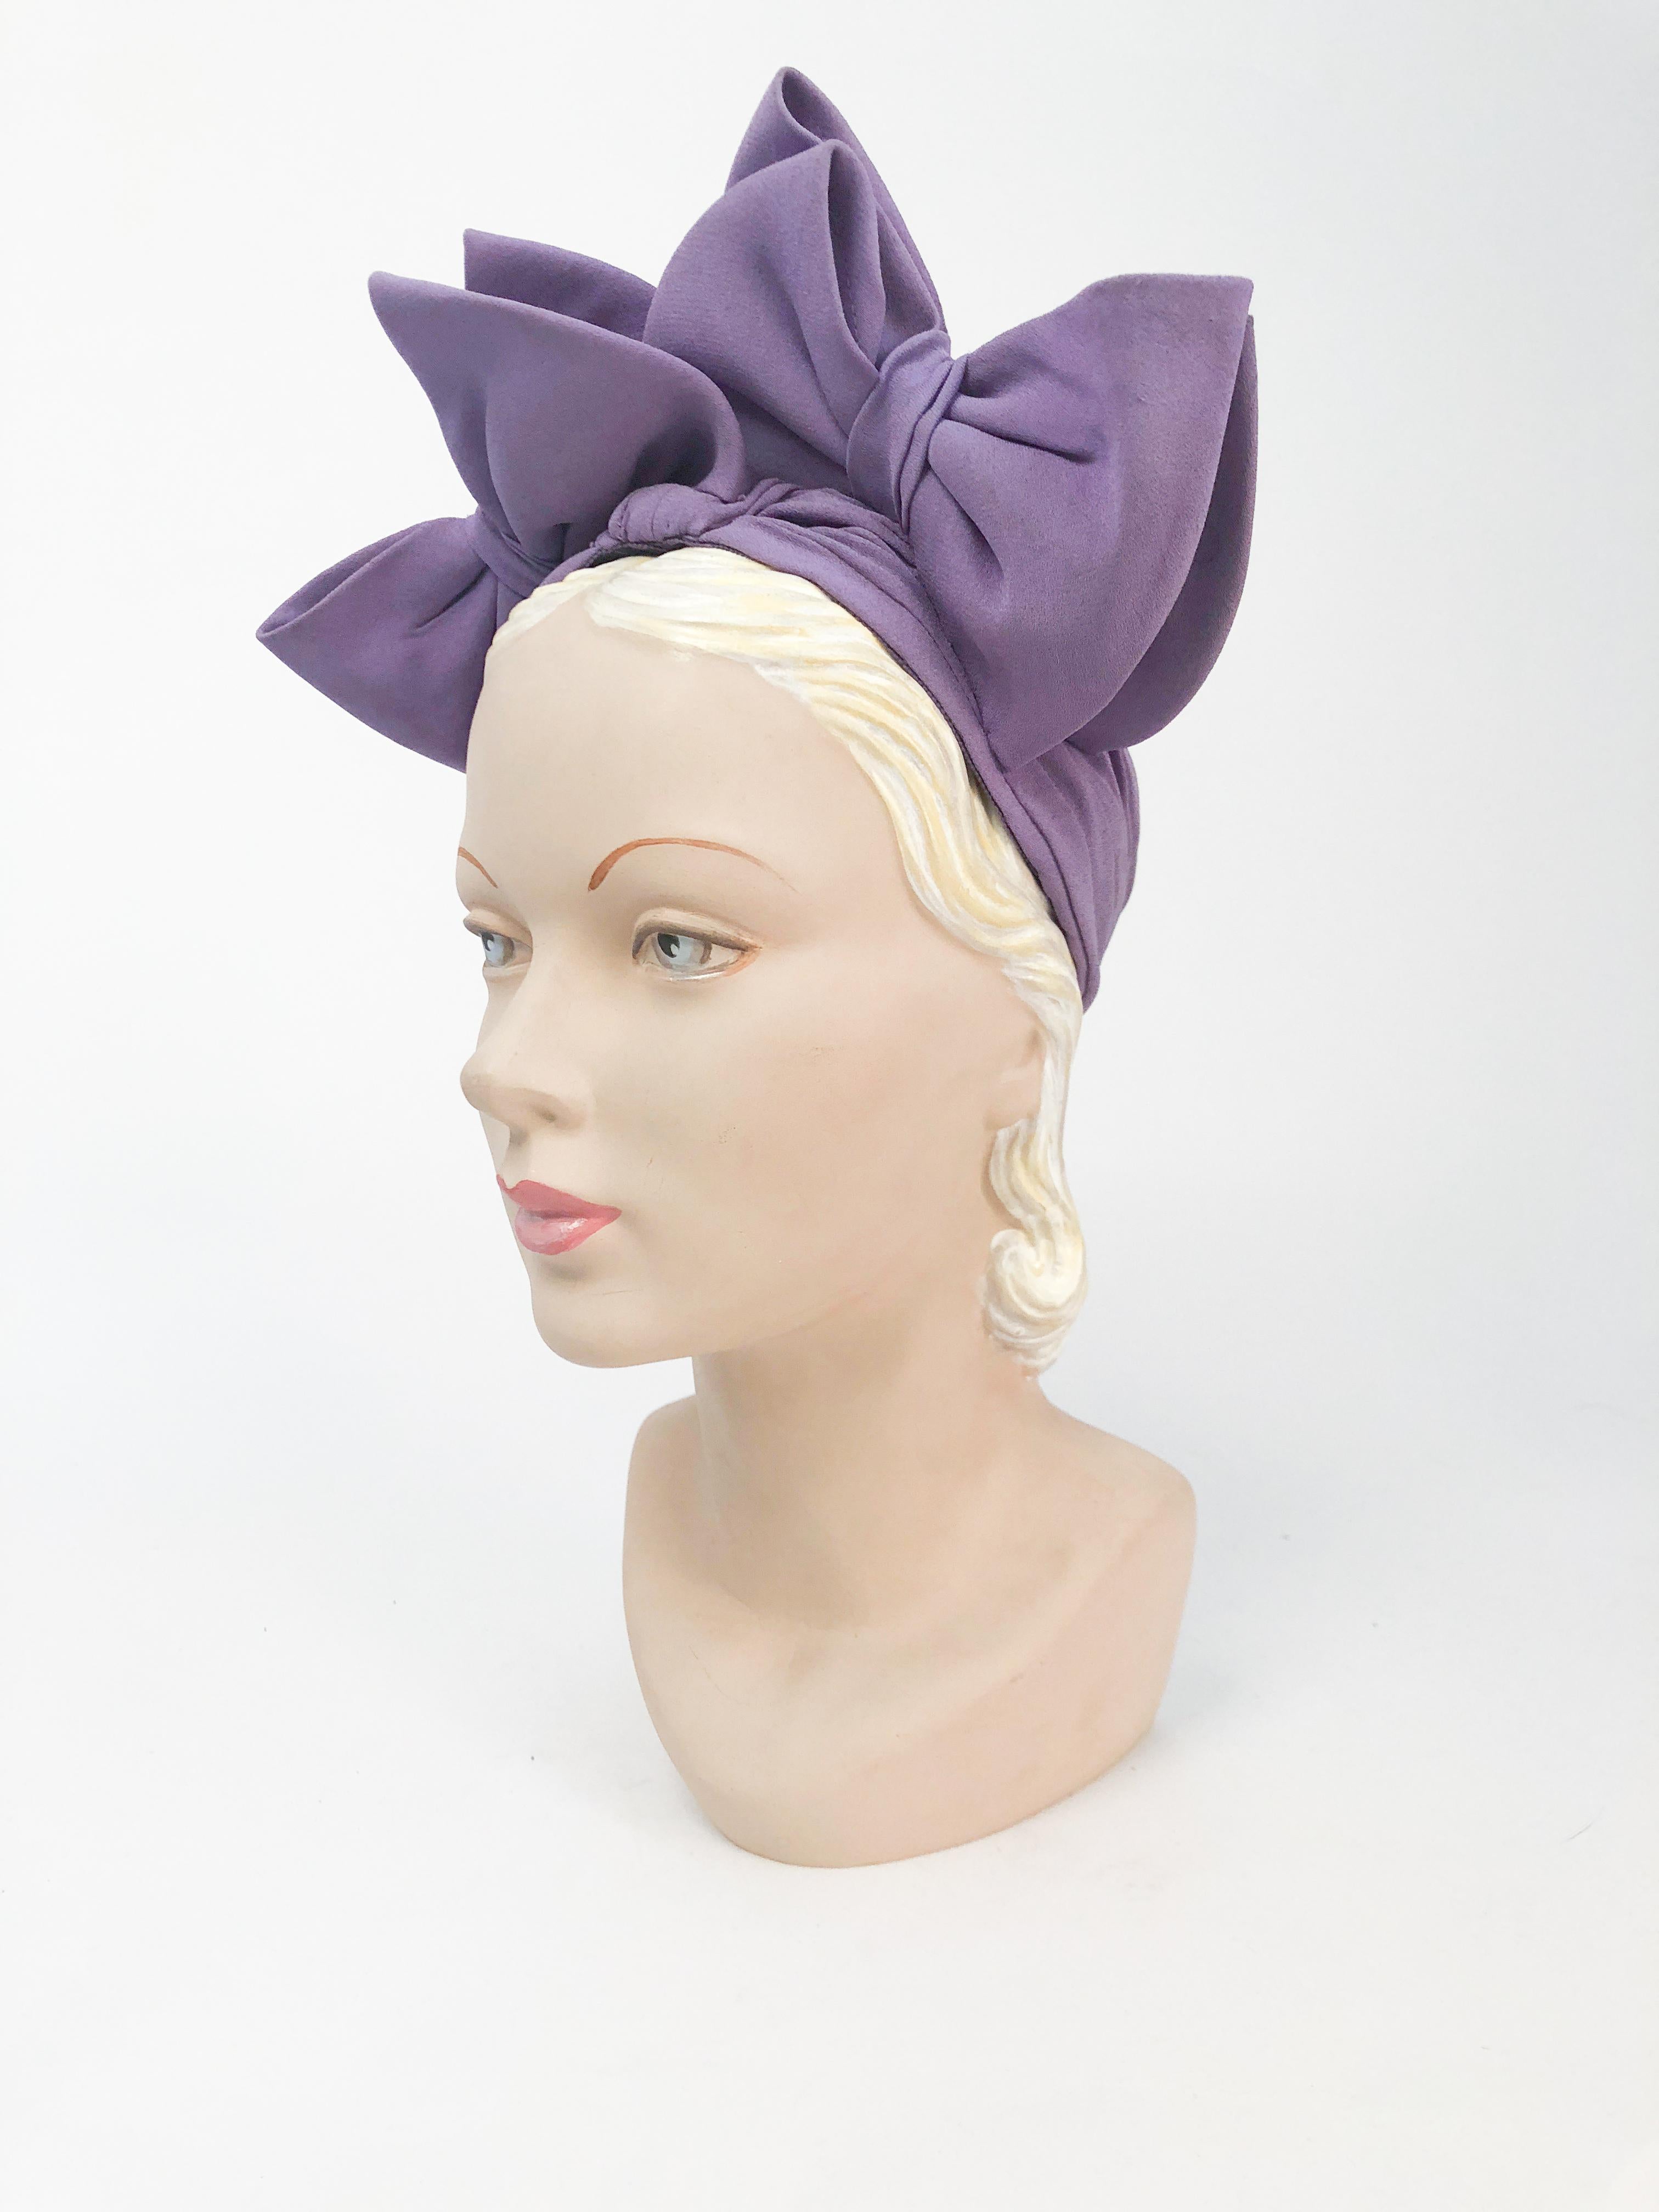 1930s Lavender Crepe Turban with Matching Bows. Lavender crepe hand made turban with 4 oversized structured bows and pleats. 